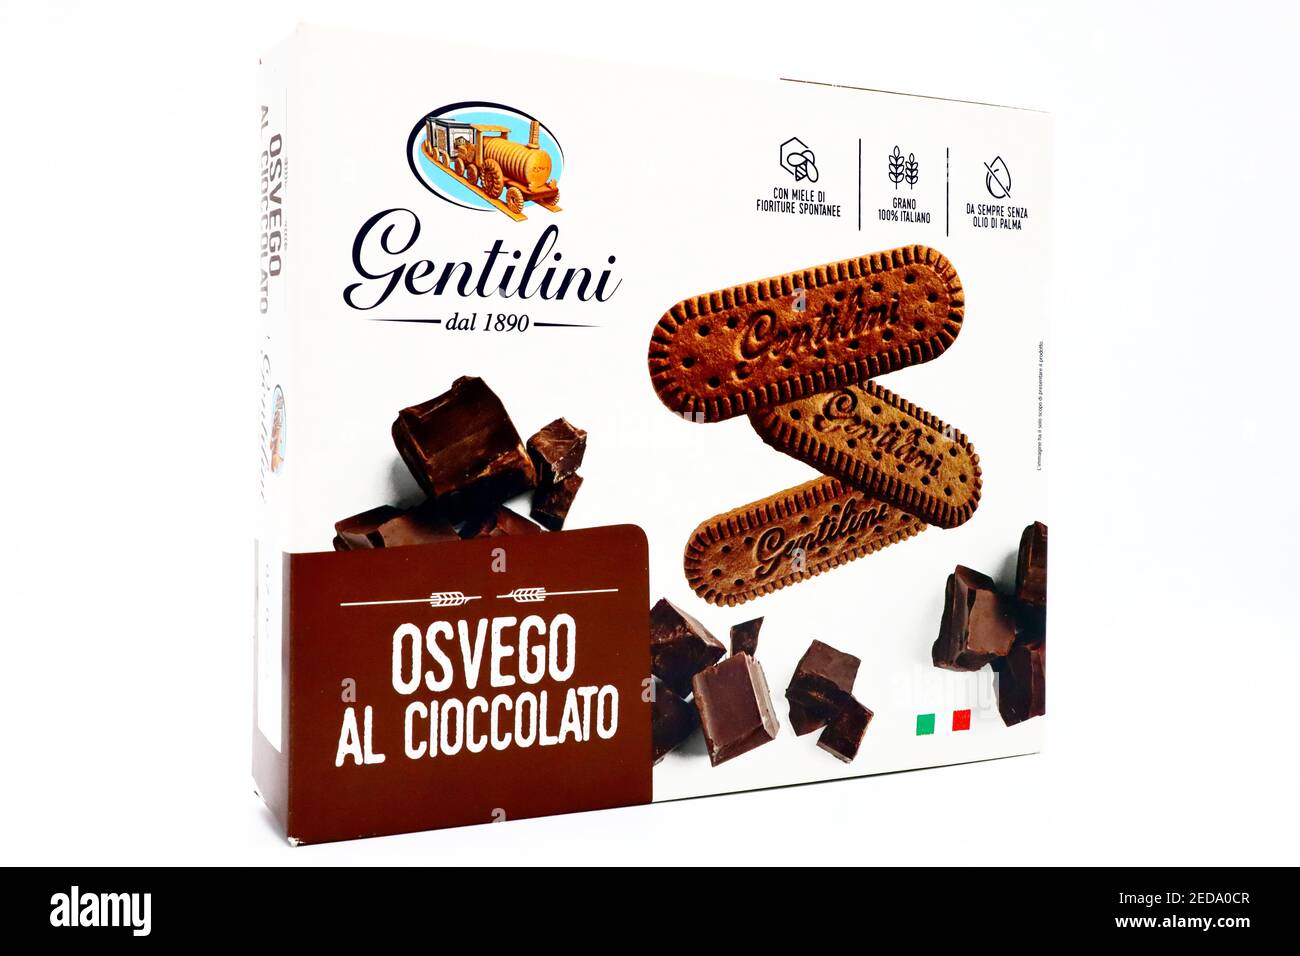 Osvego Chocolate Cookies produced in Italy by Gentilini Stock Photo